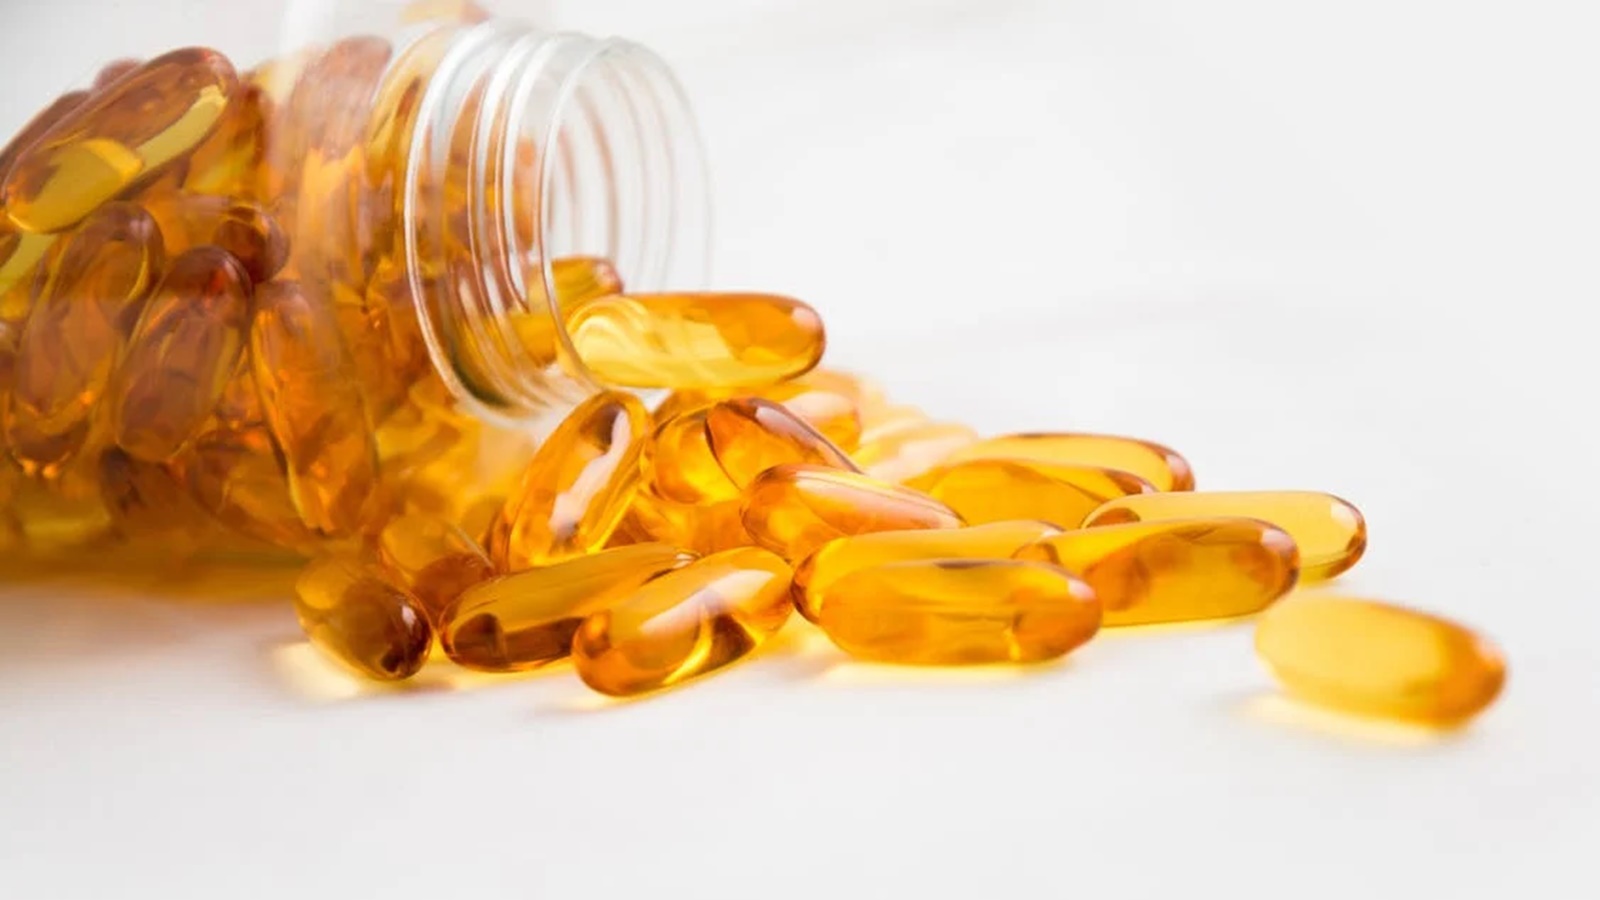 What is the recommended daily dosage for fish oil supplements?